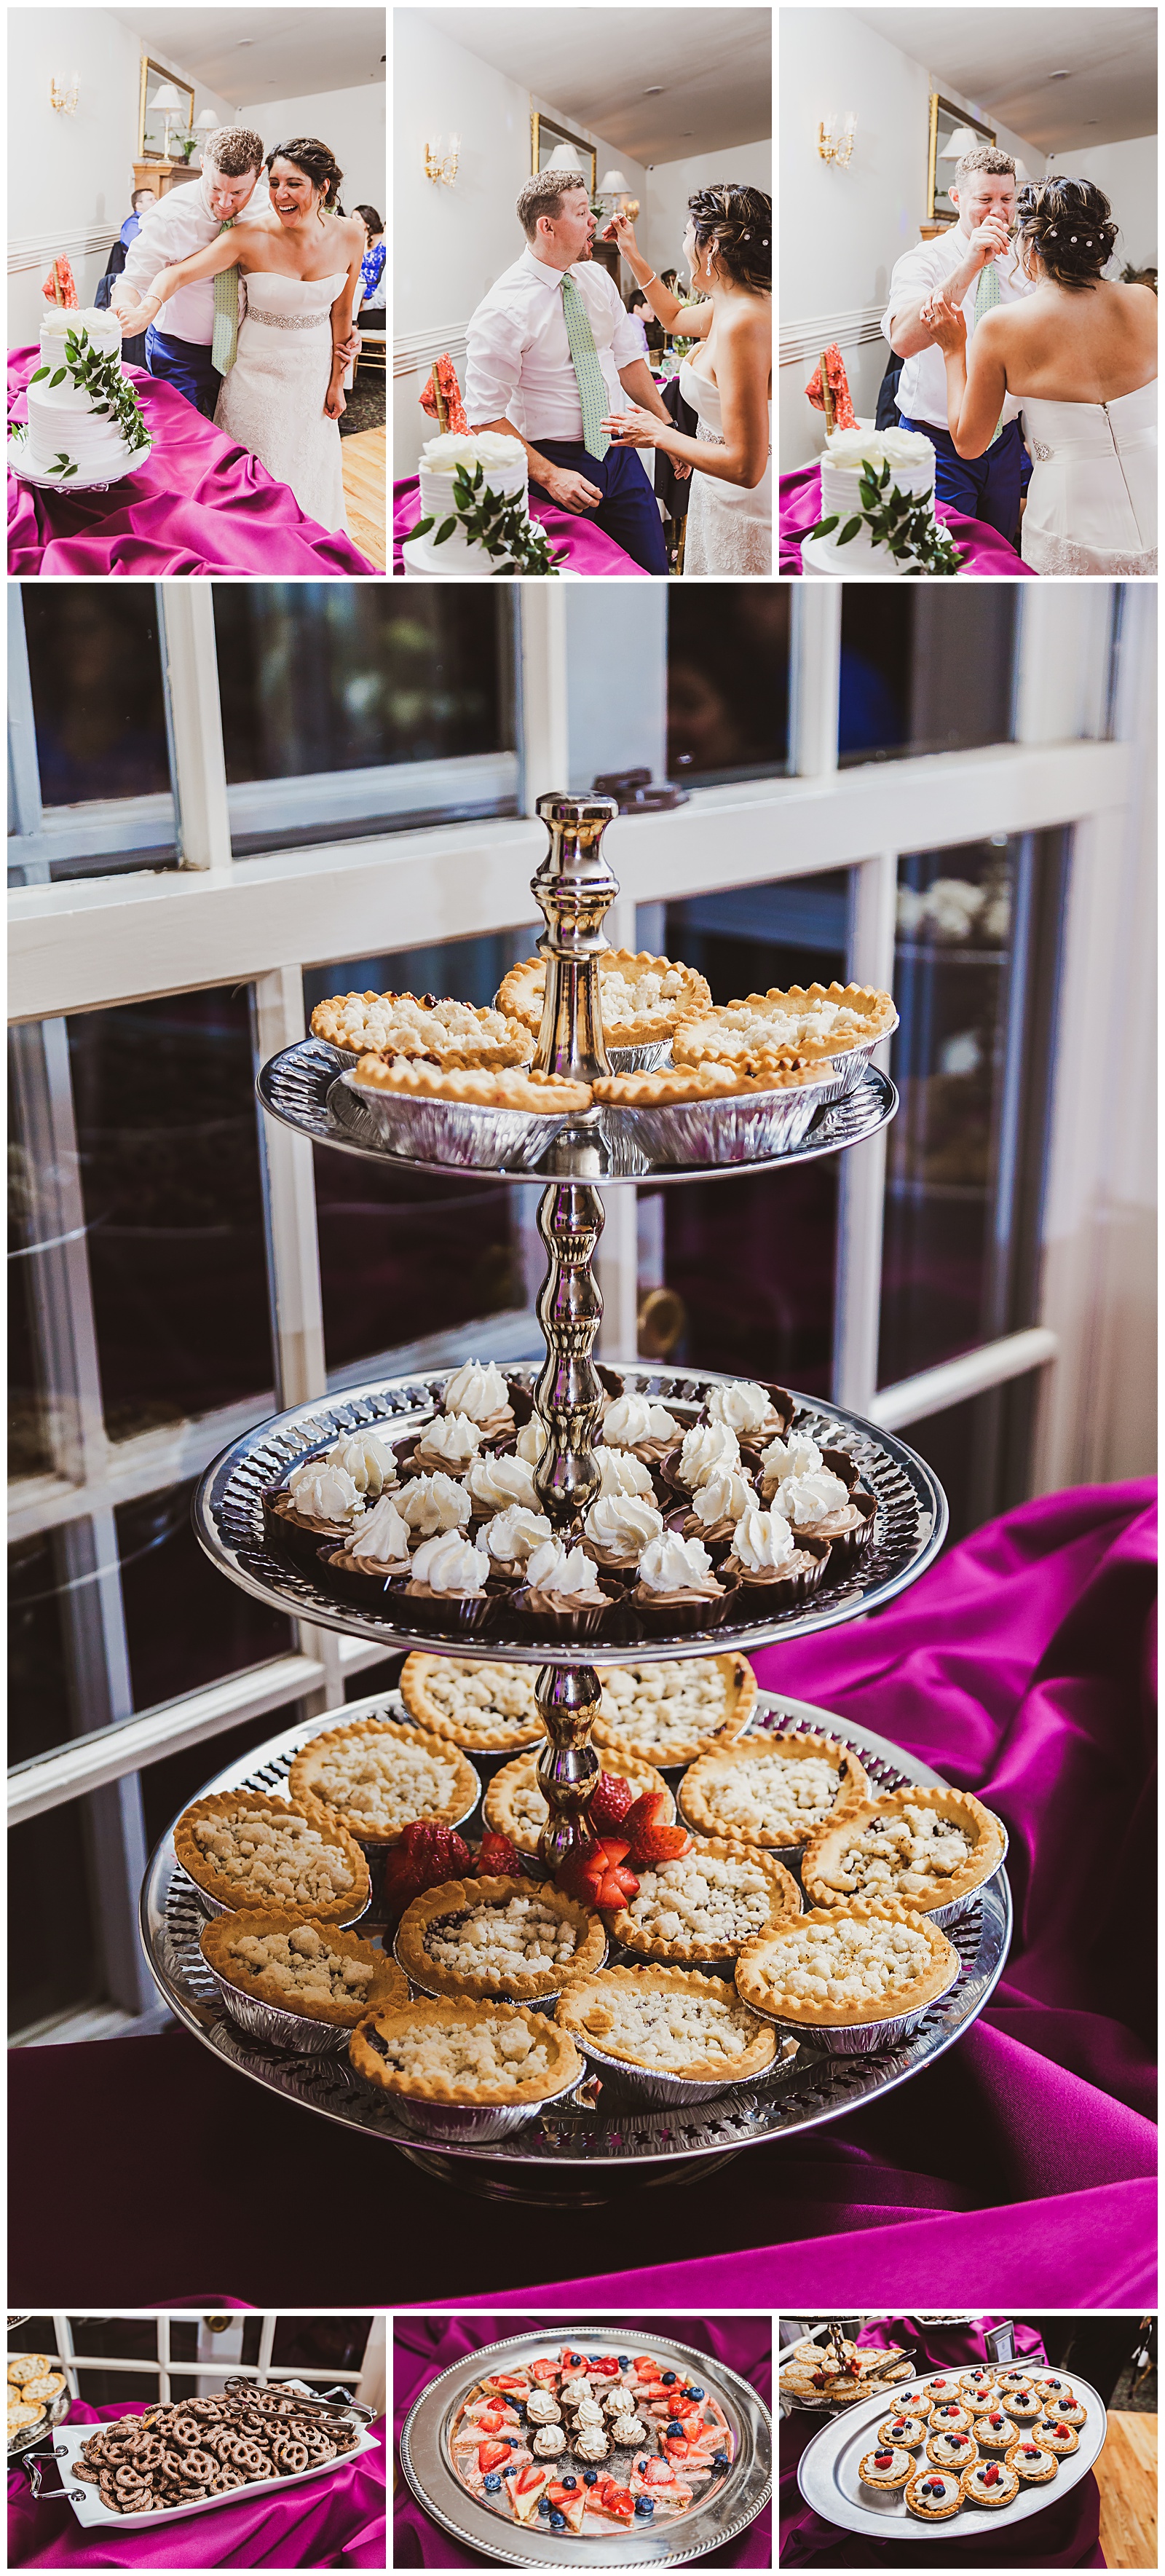 reception treats at willow ridge manor in morrison, co